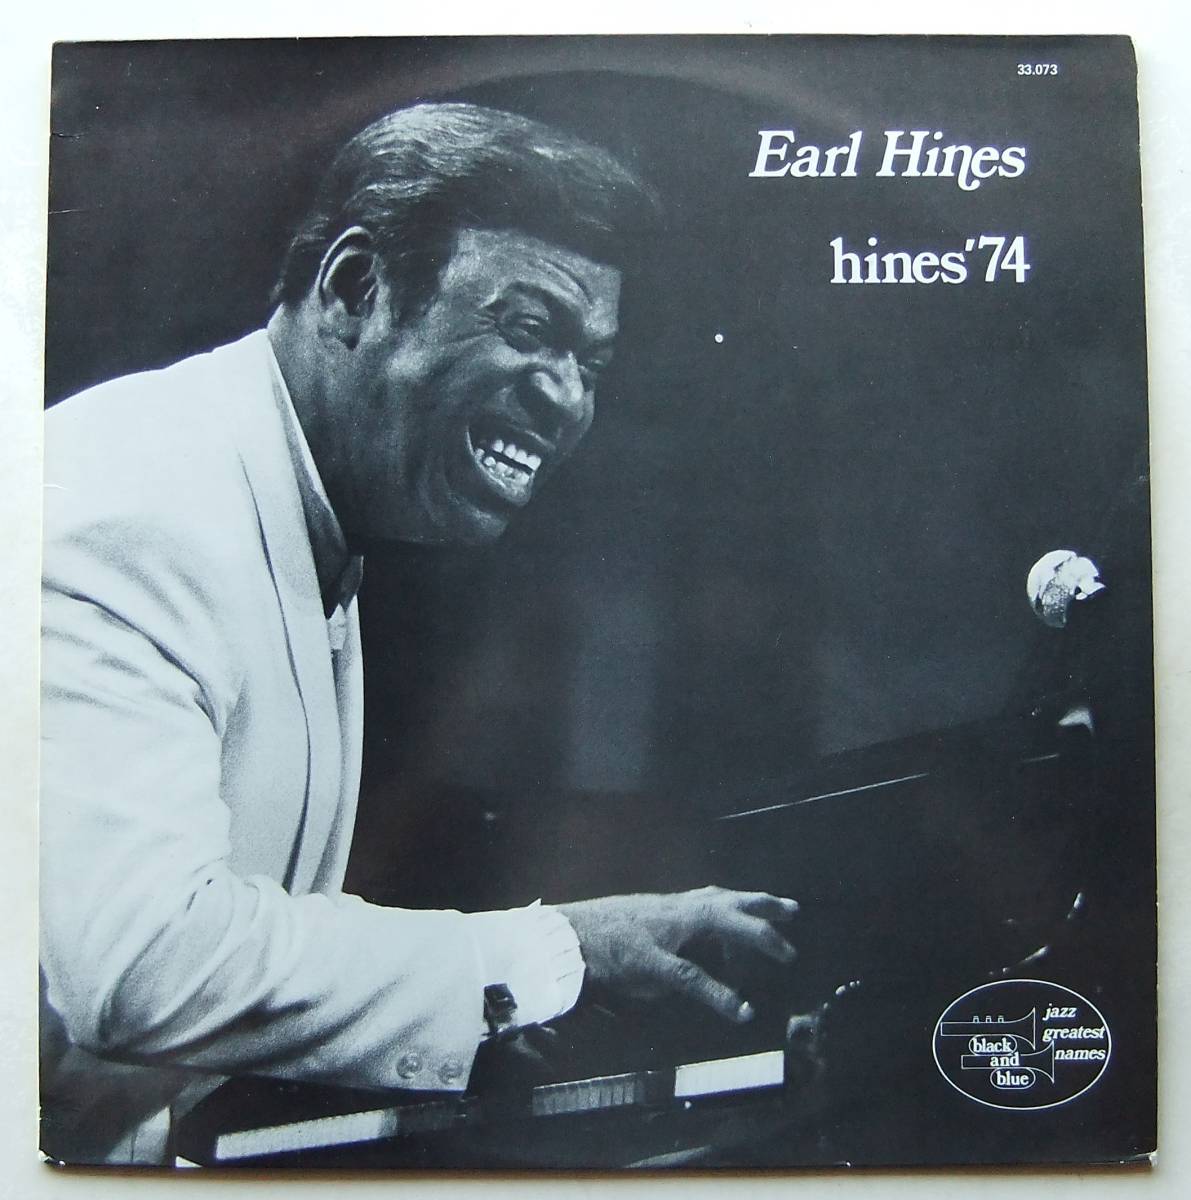 ◆ EARL HINES / Hines '74 ◆ Black and Blue 33.073 (France) ◆_画像1